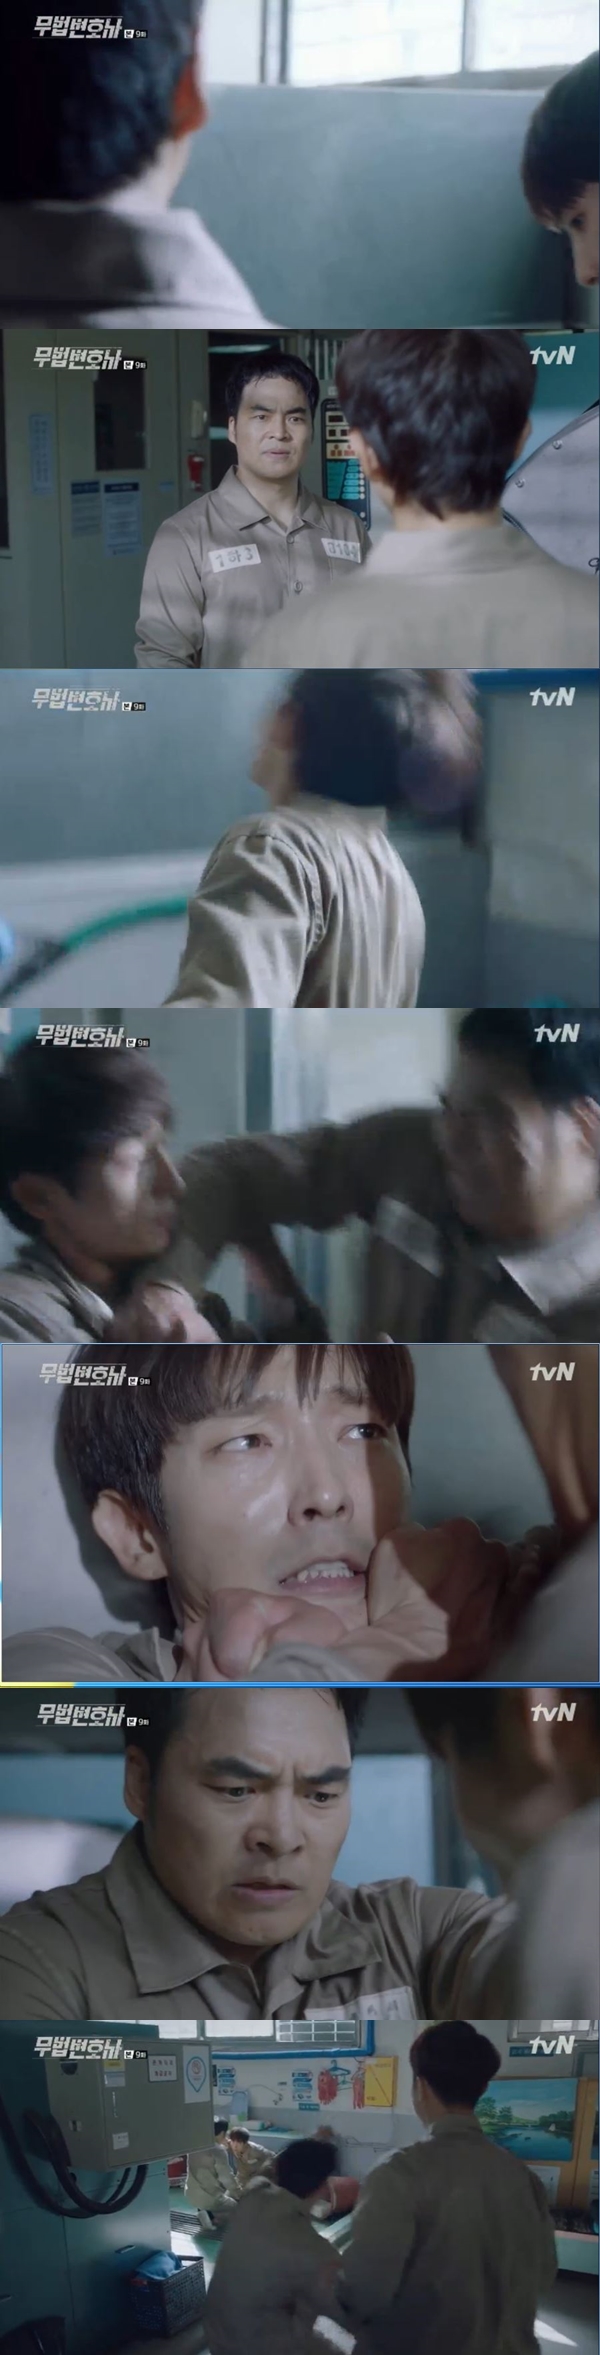 Bong Sang-pil (Lee Joon-gi) was in crisis after being stabbed in the abdomen.On TVN Lawless Lawyer, which aired at 9:10 p.m. on the 9th, Bong Sang-pil, who was struggling to enter prison on charges of Choi For Heroes (Ahn Nae-sang) Murder, appeared.Bong was arrested on suspicion of Murder by Choi For Heroes (Ahn Nae-sang). Ha Jae-yi (Seo Ye-ji) tried to leave the office, saying he should meet Bong.At this time, the prosecution came out for seizure and Ha Jae-yi faced Chun Seung-beom (Park Ho-san) and the factory head (Kim Kwang-kyu).Ha Jae-yi was disappointed to say to Chun Seung-bum, You know that Bongbyeon did not do it.However, Chun Seung-bum said, Mr. Ha Jae-yi, I am not a friend of the prosecutor Bong Sang-pil. He said, I will investigate whether or not he is a criminal.Kang Yeon Hee (Cha Jung-won) warned Ha Jae-yi, saying, If you find any evidence here, you should be investigated for reference.But Ha Jae-yi ignored Kang Yeon Hee and went to the place where he had a service essay saying, Yes, I will accept it if I need it.Ha Jae-yi visited Bong Sang-pil, who was struggling with his uncles death in prison. Ha Jae-yi looked at Bong Sang-pil and asked, Do you like it when Im away? Bong Sang-pil looked at her and said, Im sorry.But I have a favor. He said, I will ask you for your way to my uncle. Ha Jae-yi said, No, my uncle will send me his hand. He mentioned that he would become his lawyer.Cha Moon-sook (Lee Hye-young) called An-ju (Choi Min-soo) and said, If the hound that was raising bites a person without permission from the owner, the dog euthanizes him. If I bark, ask him to bark and bite.I raised a dog, he said. I do not know why all the plans are my loyalty to bury the judges past.Kang Yeon Hee has secured a witness in the case of Choi For Heroes, which has become a disadvantage for Ha Jae-yi, who should defend Bong Sang-pil.To Bong Sang-pil, who is worried about this, Ha Jae-yi asked, Im preparing for it. Who was calling at that time?Ha Jae-yi tried to proceed with the Bong Sang-pil case by public participation trial so that Cha Moon-sook could not make arbitrary judgment.In the midst of being busy preparing for the incident, Gi-ho Ha (Lee Han-wi) came to the Lawless Lawyer firm office where Ha Jae-yi worked.At the end of Gi-ho Ha, who was worried about her daughter and went up to Seoul, Ha Jae-yi confessed, Dad is the person I love, Bong Sang-pil.Gi-ho Ha was surprised, but he could not say anything easily, and on the day of Bong Sang-pils first trial, Gi-ho Ha appeared with a suit saying he was cheering for Ha Jae-yi.After the trial, Ha Jae-yi, who visited the photo studio to collect his luggage, met with his mother, Roh Hyun-joo (Baek Joo-hee).Noh Hyun-joo told Ha Jae-yi that Choi For Heroes had hired him as a judge massager, and said, I am also fighting with Cha Moon-sook.Inside the photo was a picture of Cha Moon-sook and An-oh Ju in the past.The For Heroes, who was told that the trial was going against Bong Sang-pil, called Bong Sang-pil at the detention center.He began to hit Bong with an angry love, saying, I heard the evidence came out. Then he tried to stab him in the stomach with a weapon, but he didnt really mean to stab him.But Bong Sang-pil was stabbed by a weapon after he was released from his hands. In his losing mind, he expressed his desperate expression, saying, I want to reveal innocence like this.